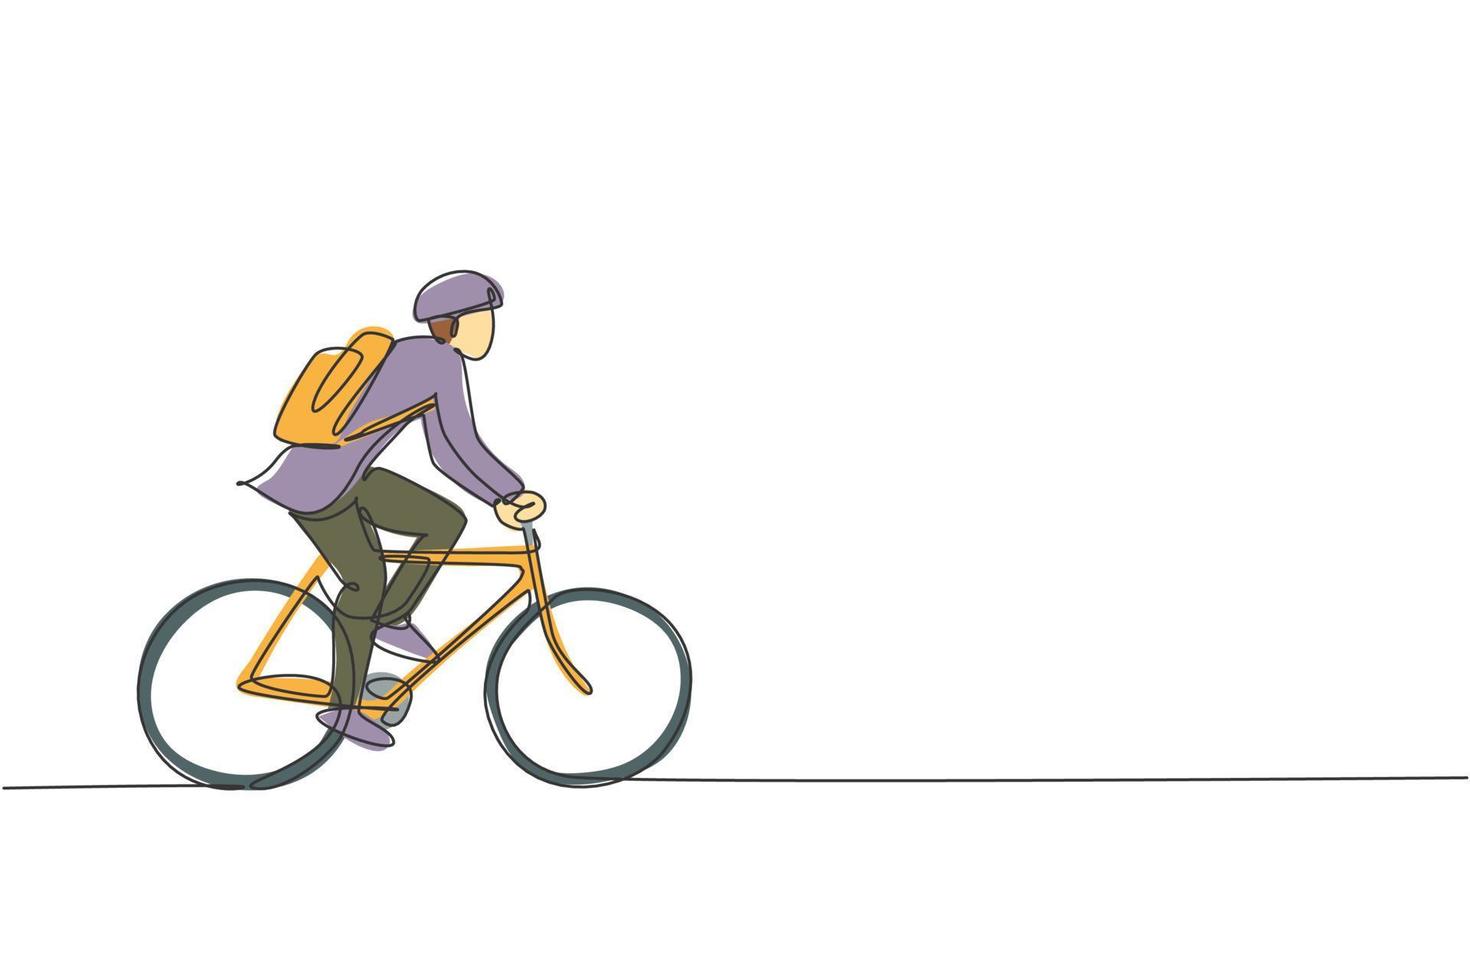 Single continuous line drawing young professional businessman riding bicycle to his company. Bike to work, eco friendly transportation concept. Trendy one line draw design graphic vector illustration